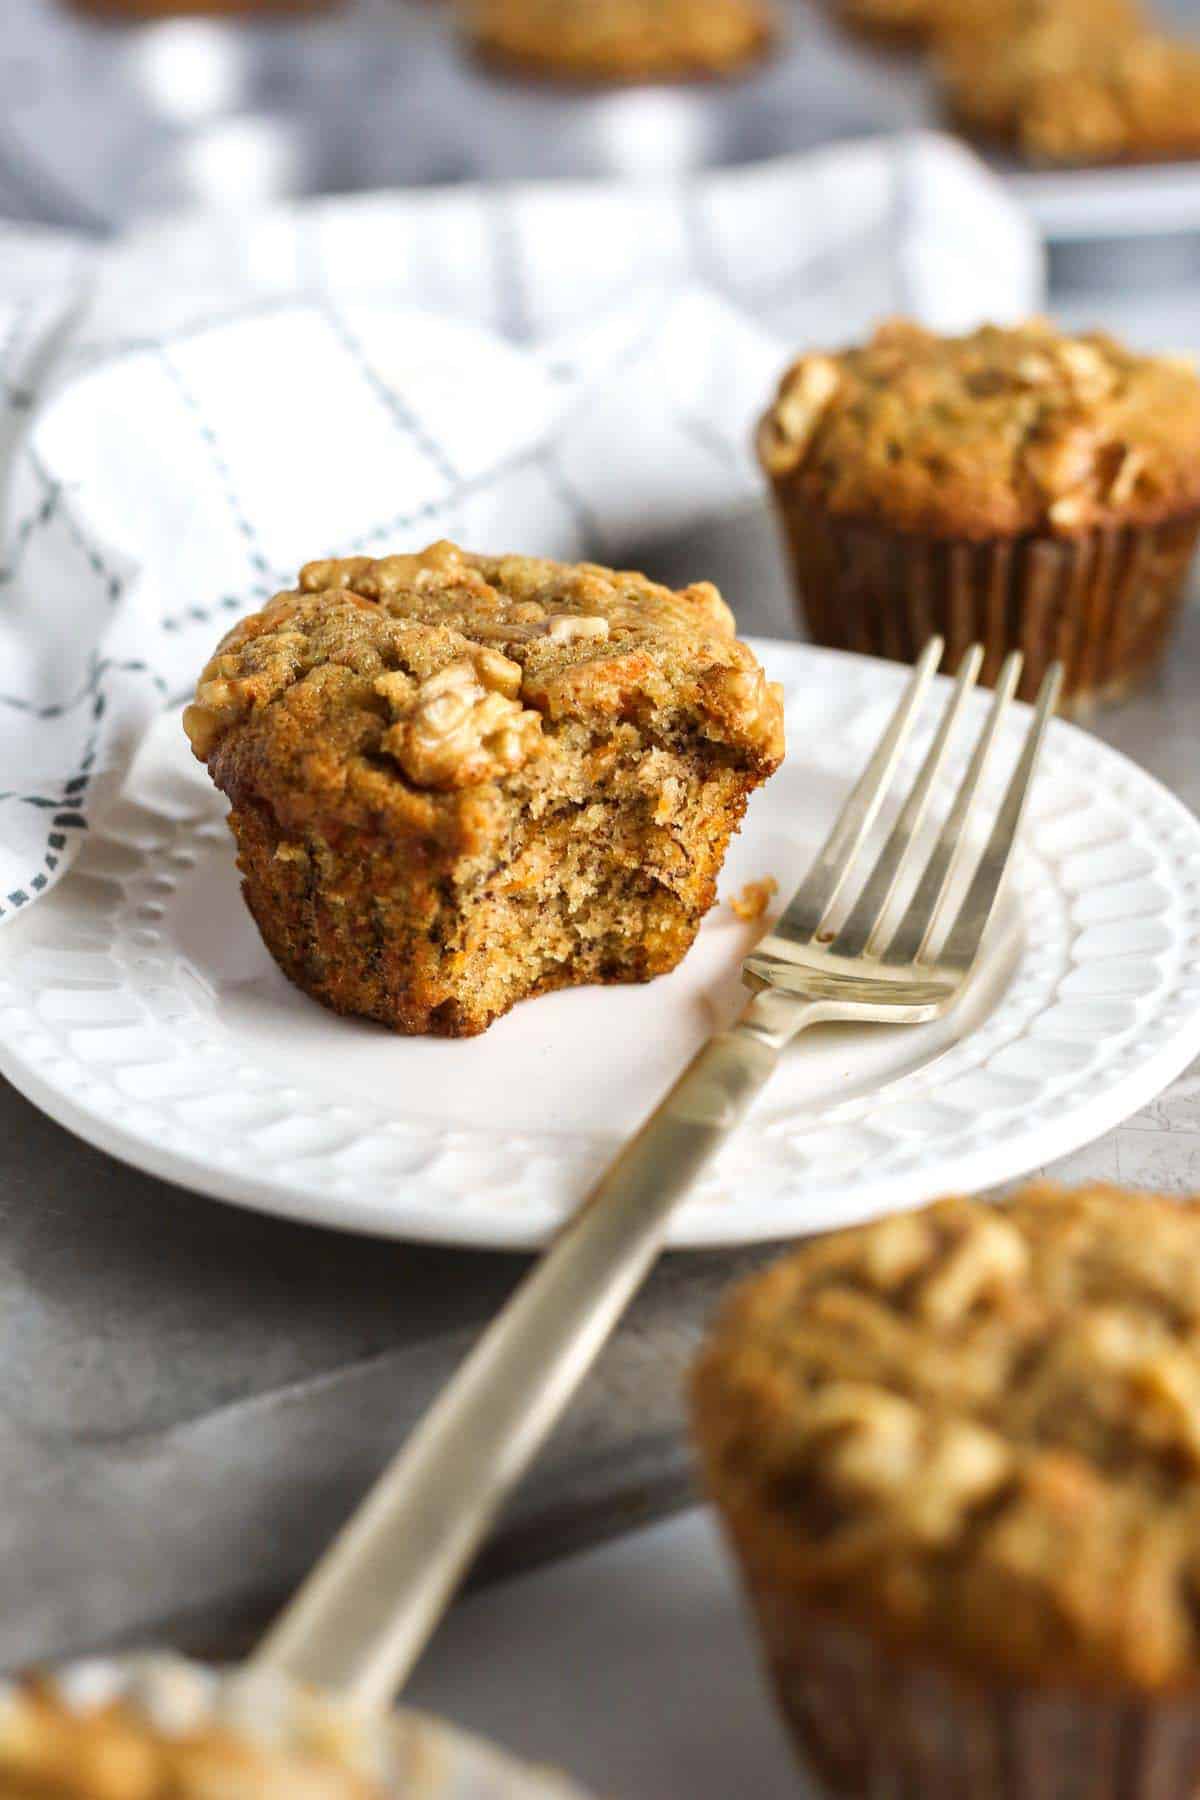 A muffin on a plate with a fork next to it.